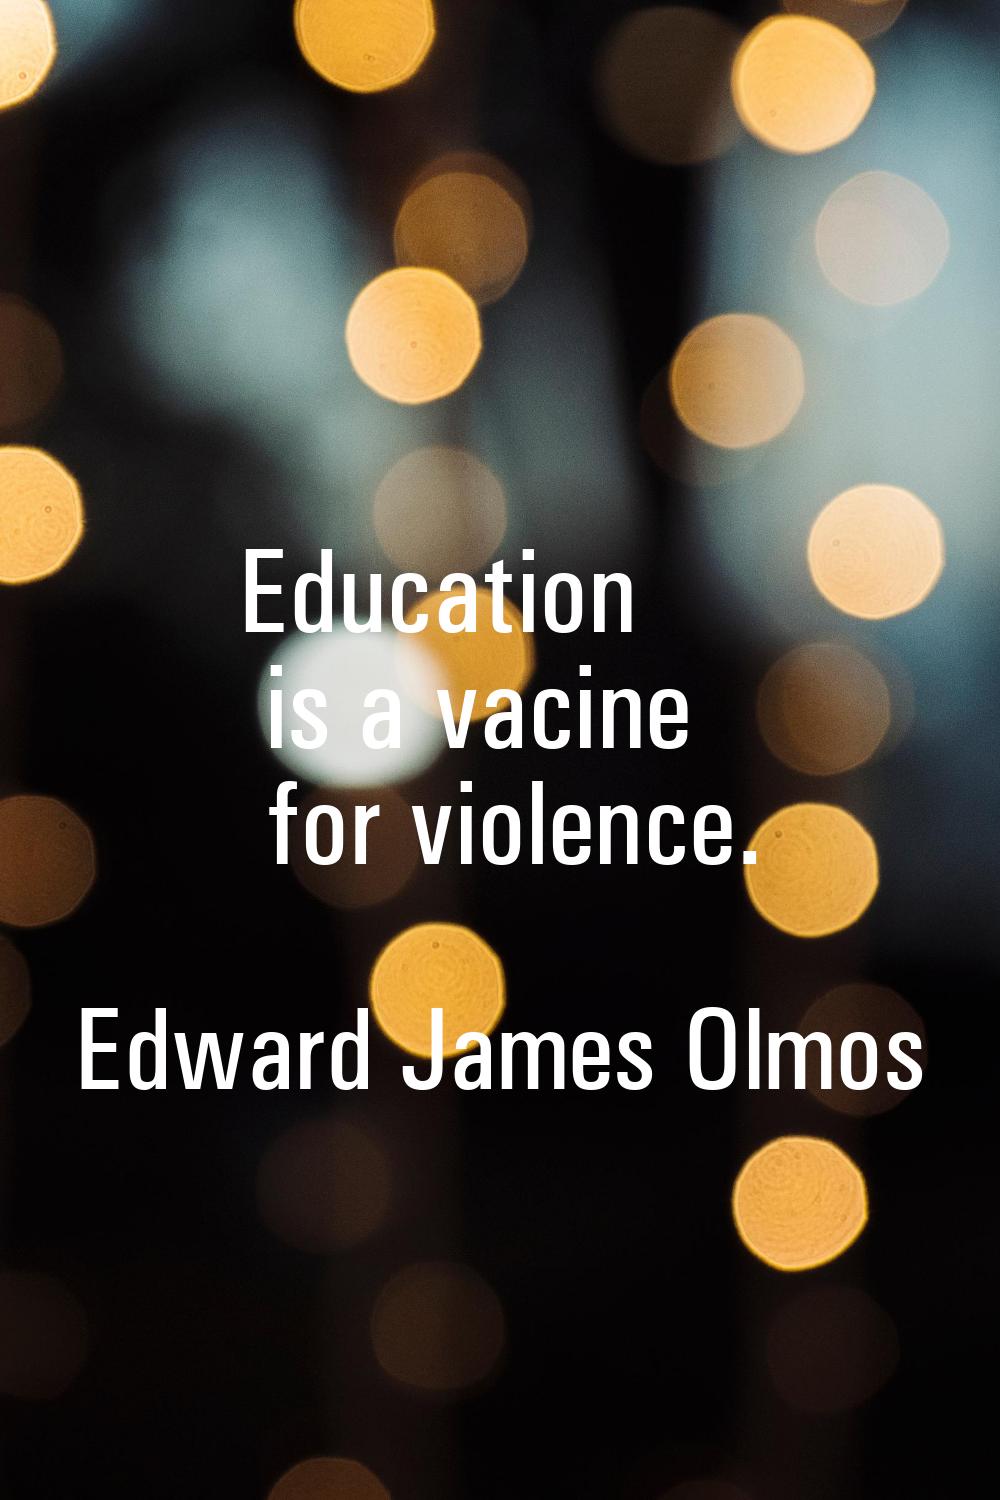 Education is a vacine for violence.